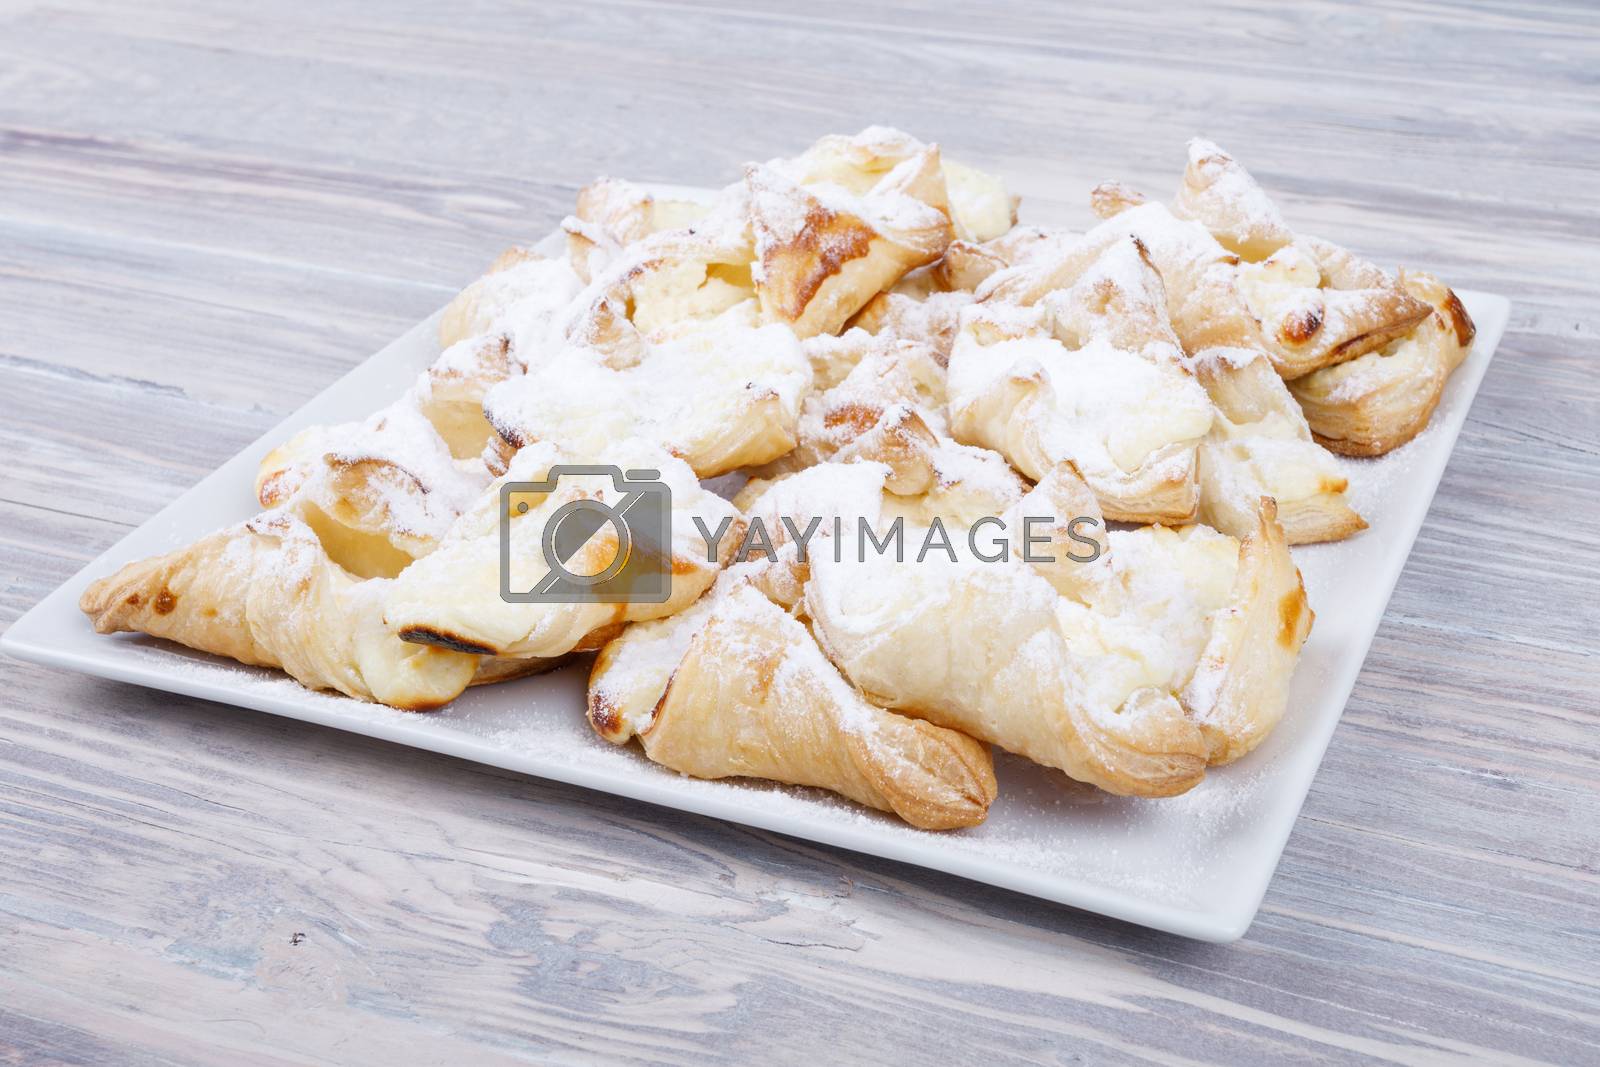 Royalty free image of traditional sweet food scarf by artush